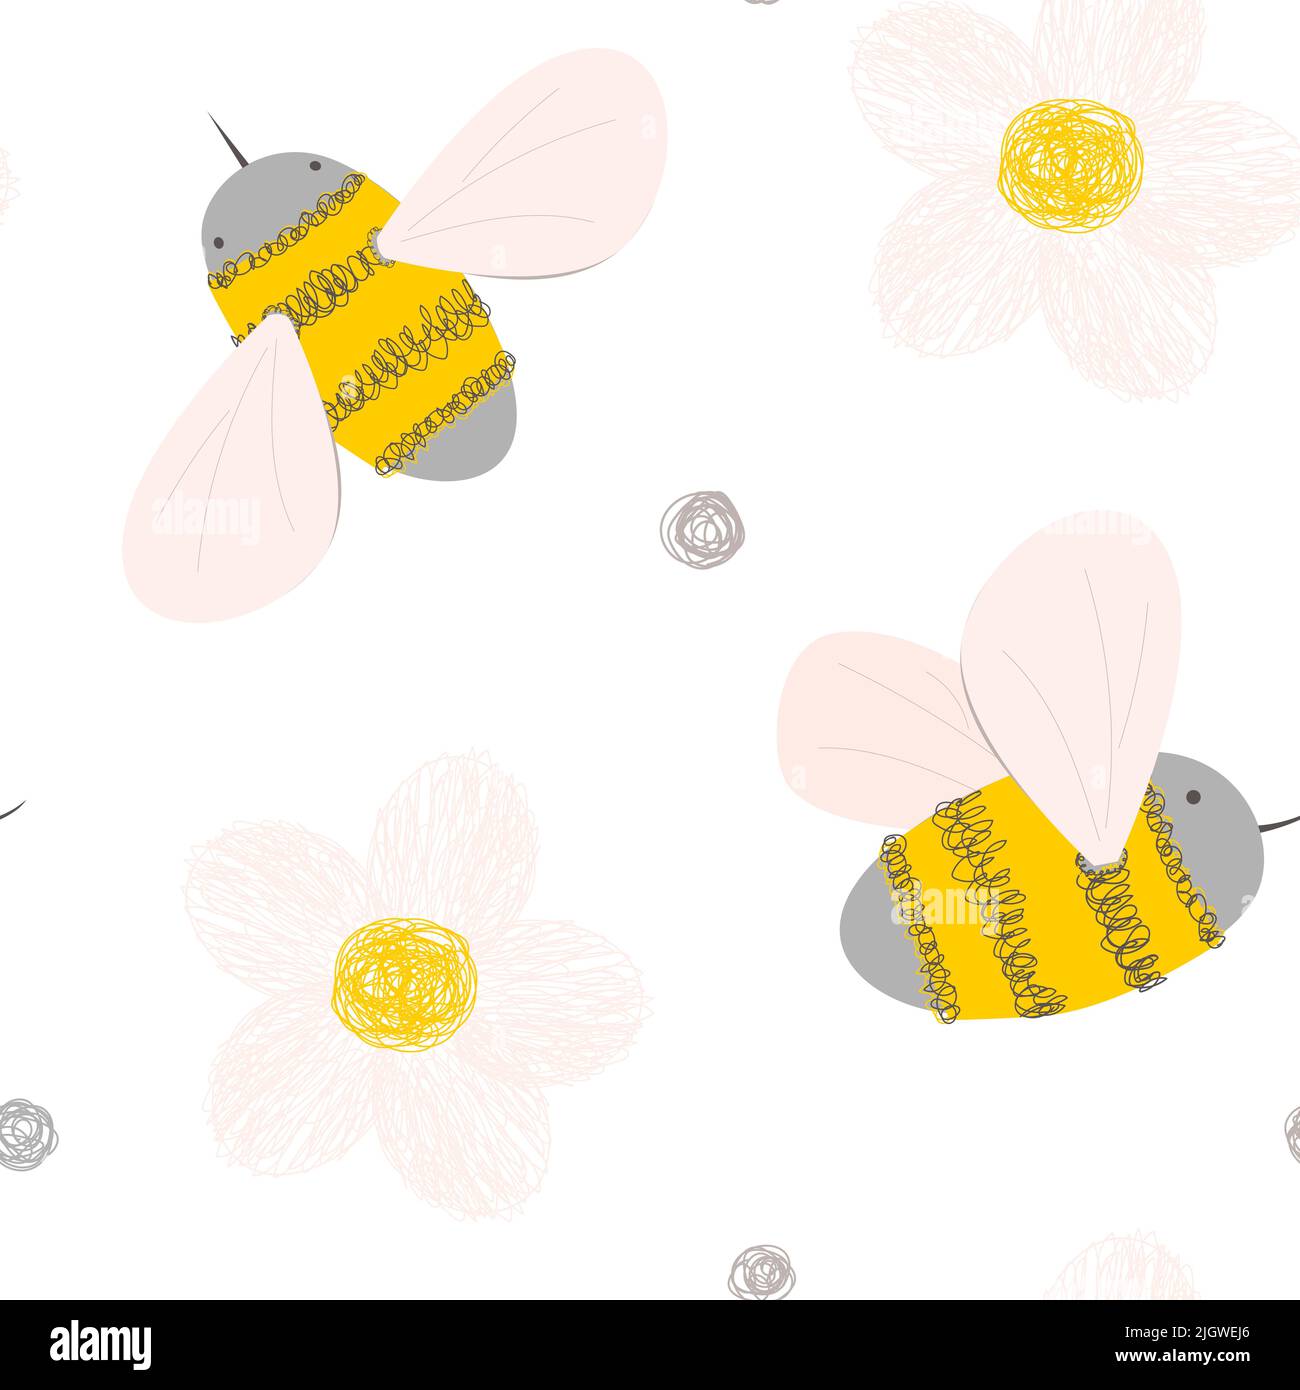 Cute seamless pattern with doodle bees and flowers. Hand drawn cartoon background for baby goods, cards, beekeeping packaging Stock Vector